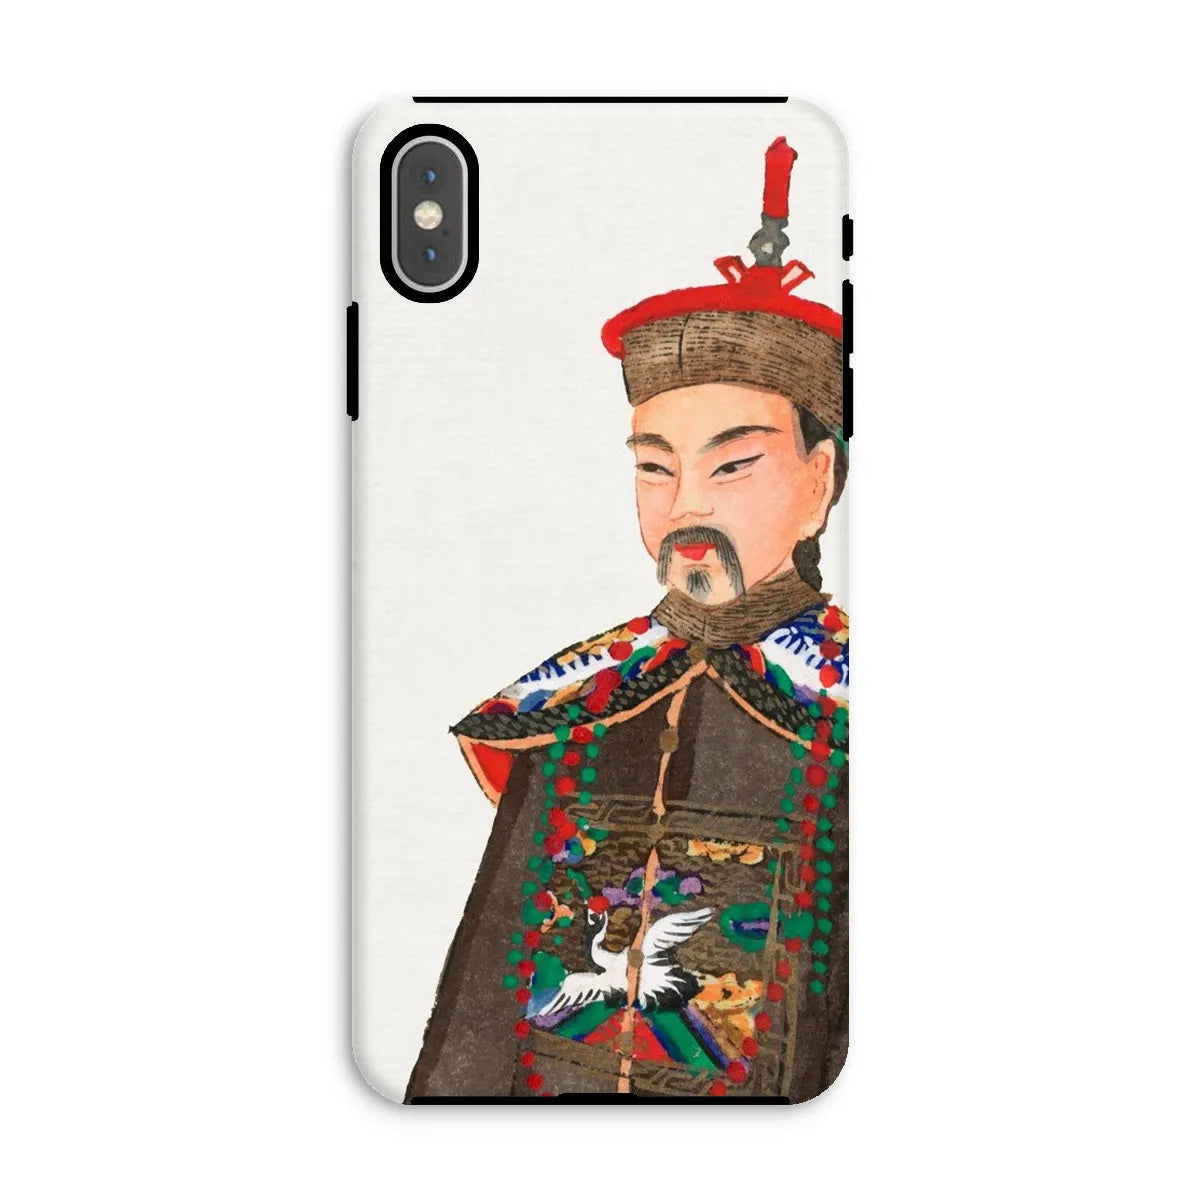 Nobleman At Court - Chinese Aesthetic Manchu Art Phone Case - Iphone Xs Max / Matte - Mobile Phone Cases - Aesthetic Art